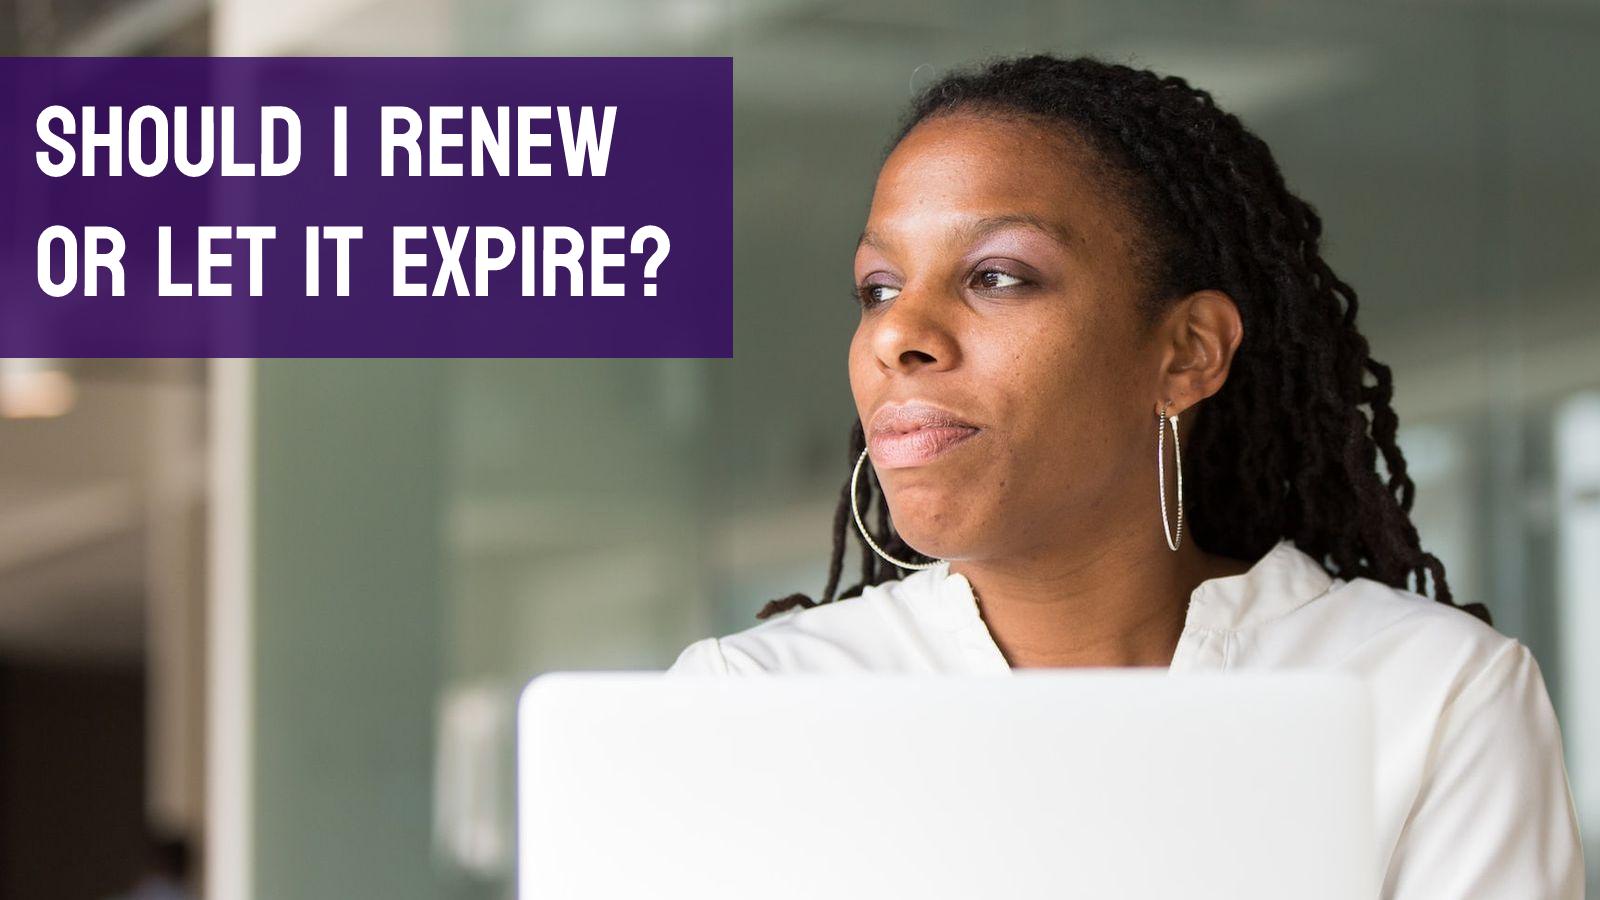 Your professional certification is about to expire - is it worth renewing it?